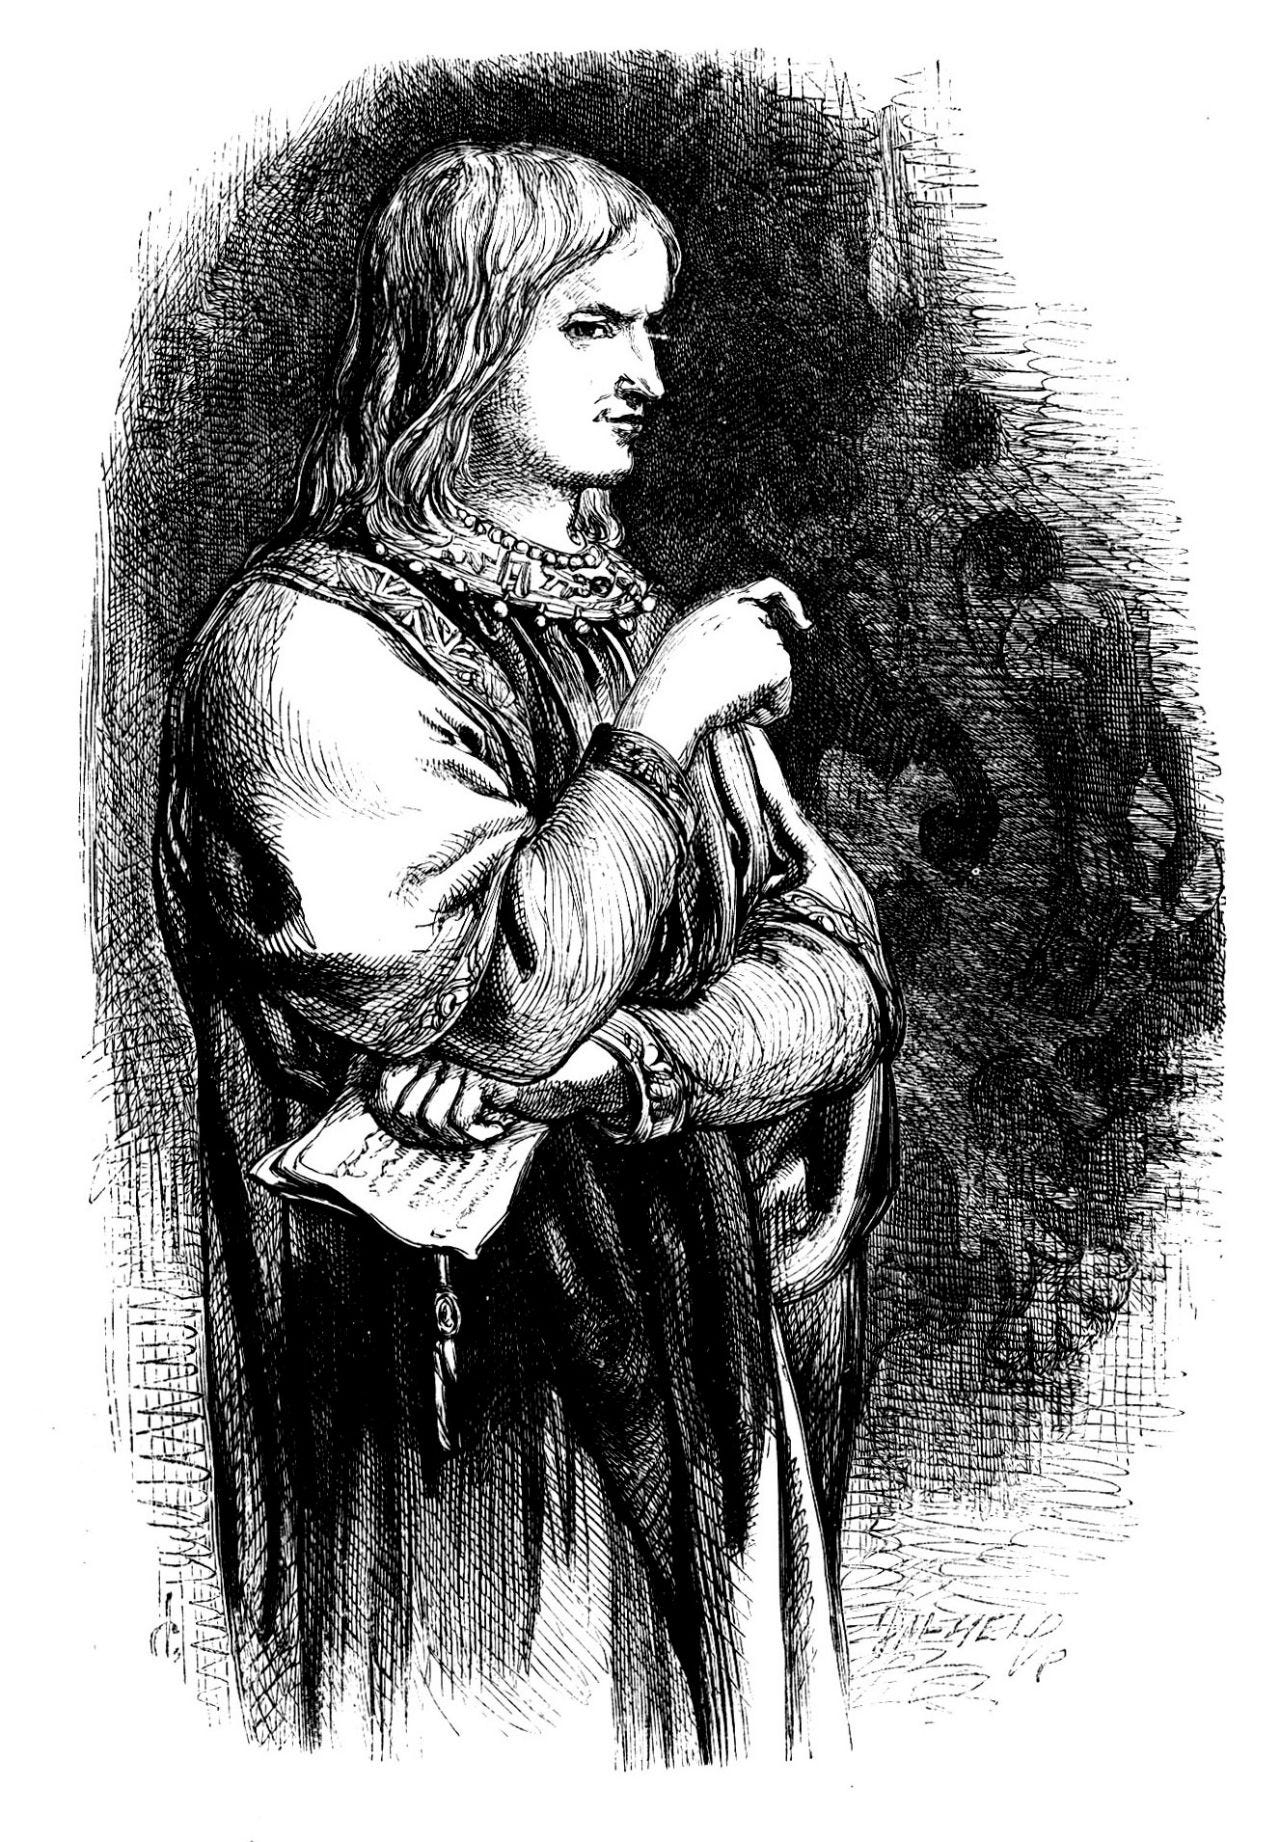 A black and white etching of a man in medieval robes with shoulder-length, fair hair. He is smirking and half-concealing a letter in one hand. 